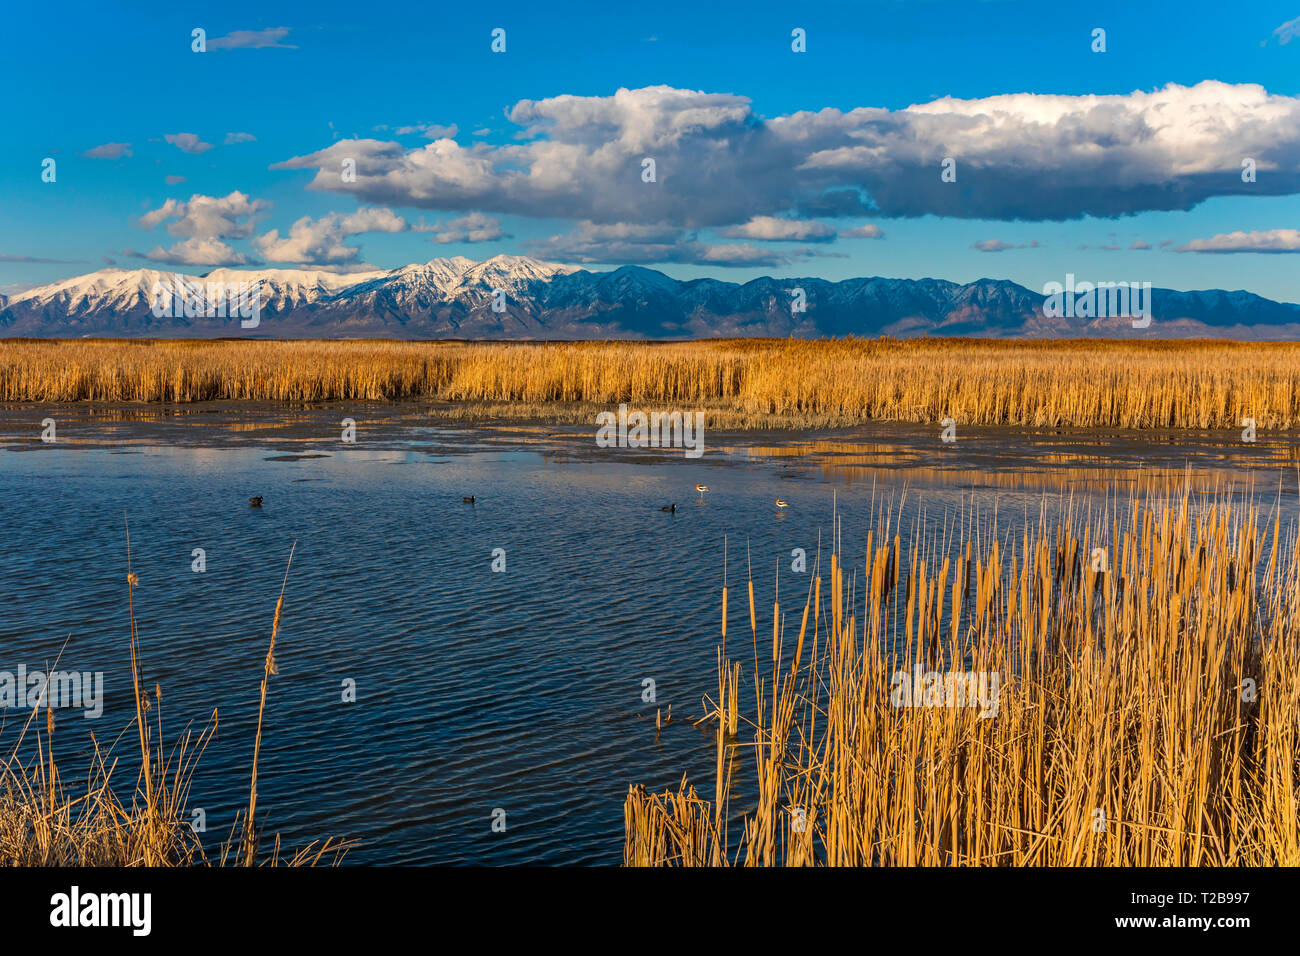 This is a view of beautiful springtime day on Unit 2 of the Bear River Migratory Bird Refuge near Brigham City, Utah, USA. Stock Photo